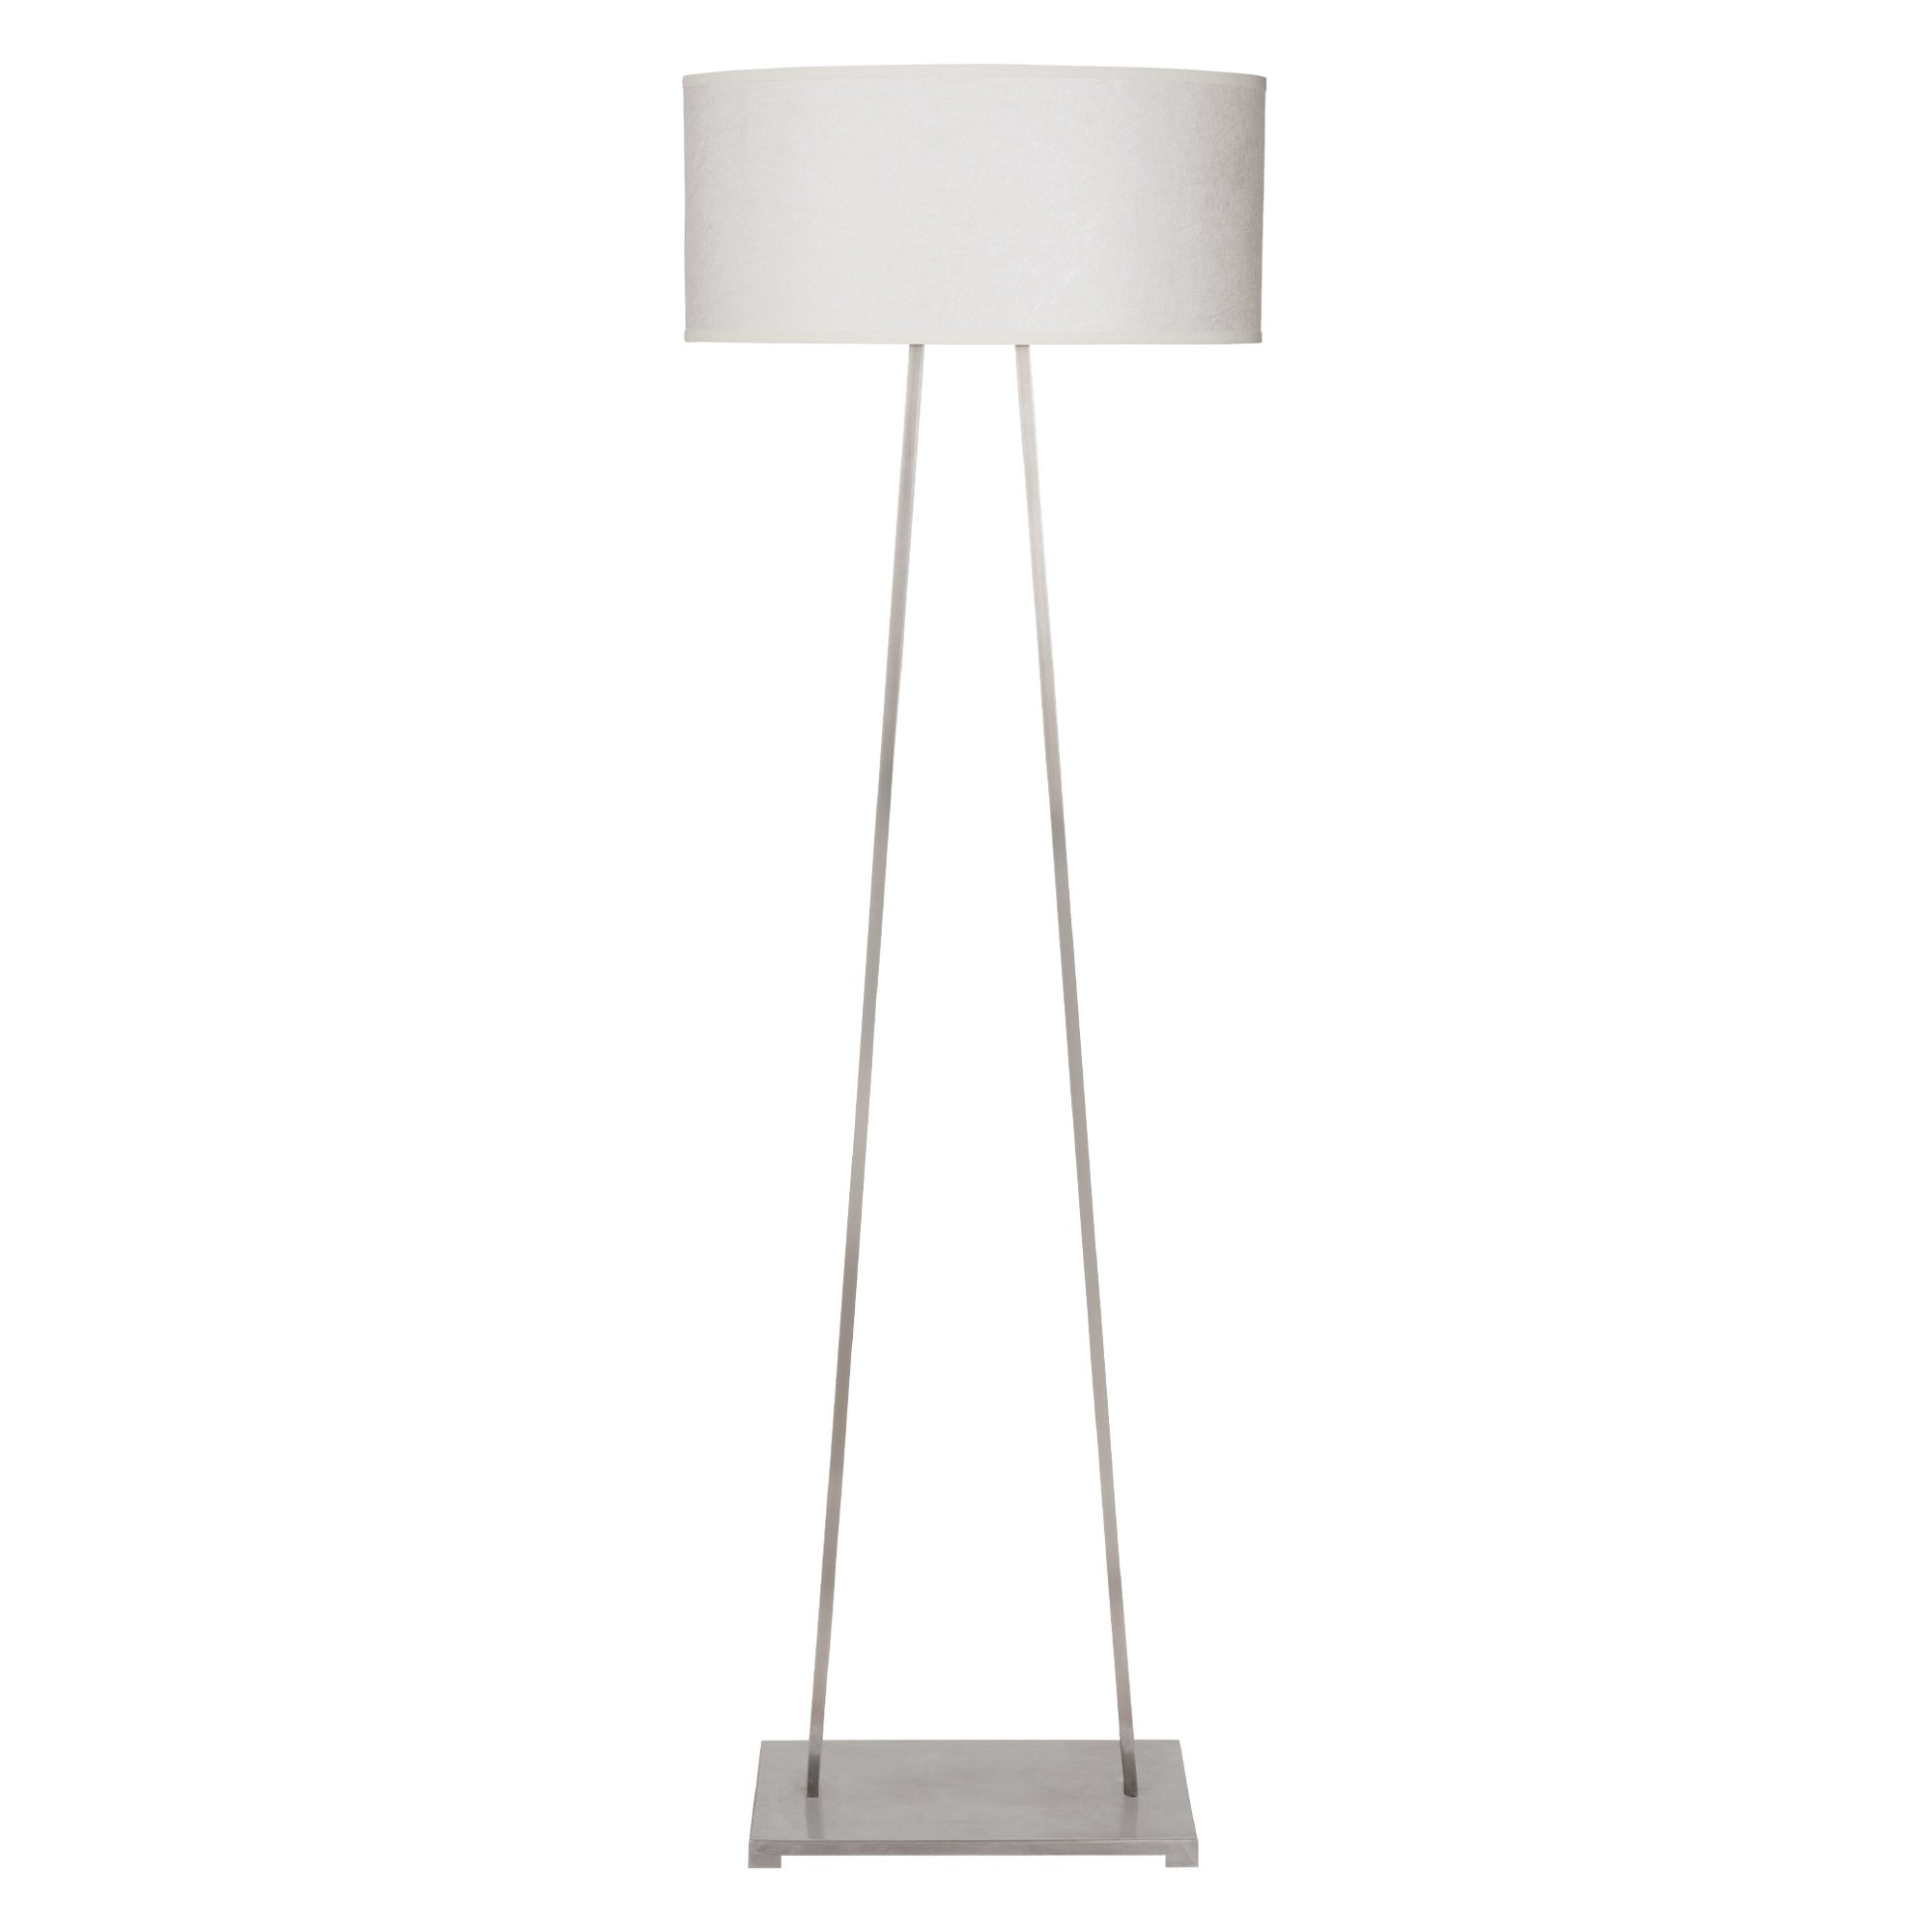 "A" Frame Brushed Nickel Floor Lamp with Oval Shade